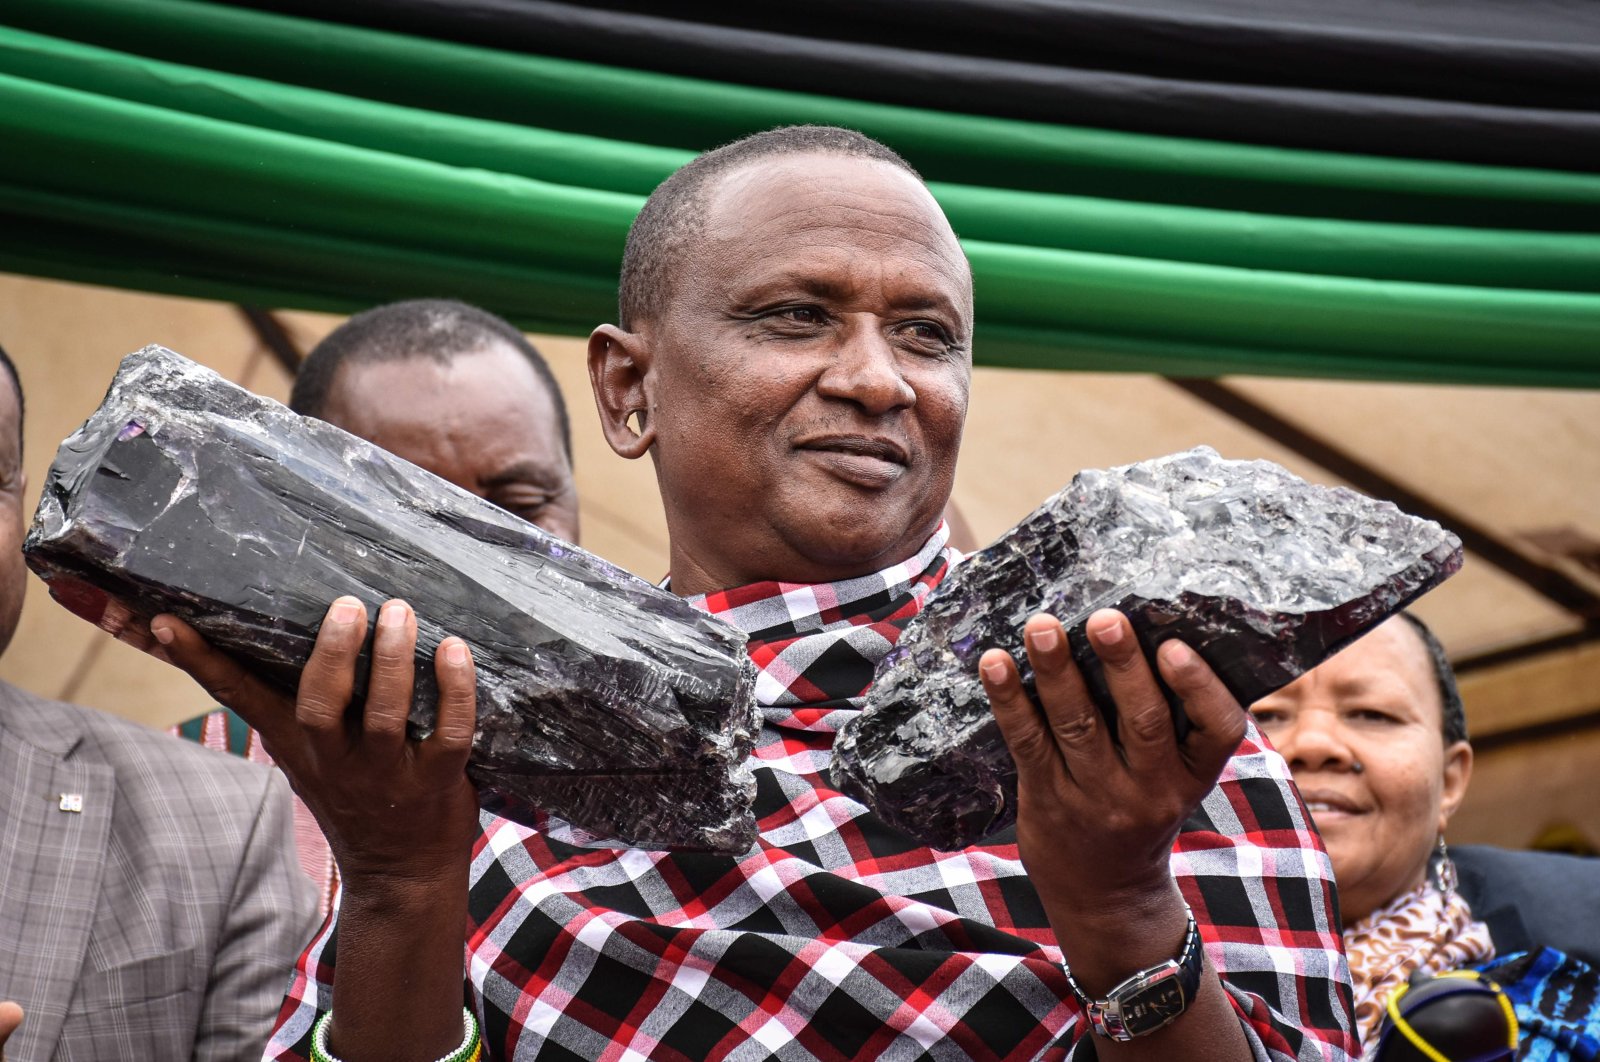 Tanzanian miner Saniniu Kuryan Laizer, 52, poses with two of the country's biggest precious gemstones, Tanzanite, during a handing-over ceremony in Manyara, northern Tanzania, June 24, 2020. (AFP Photo)